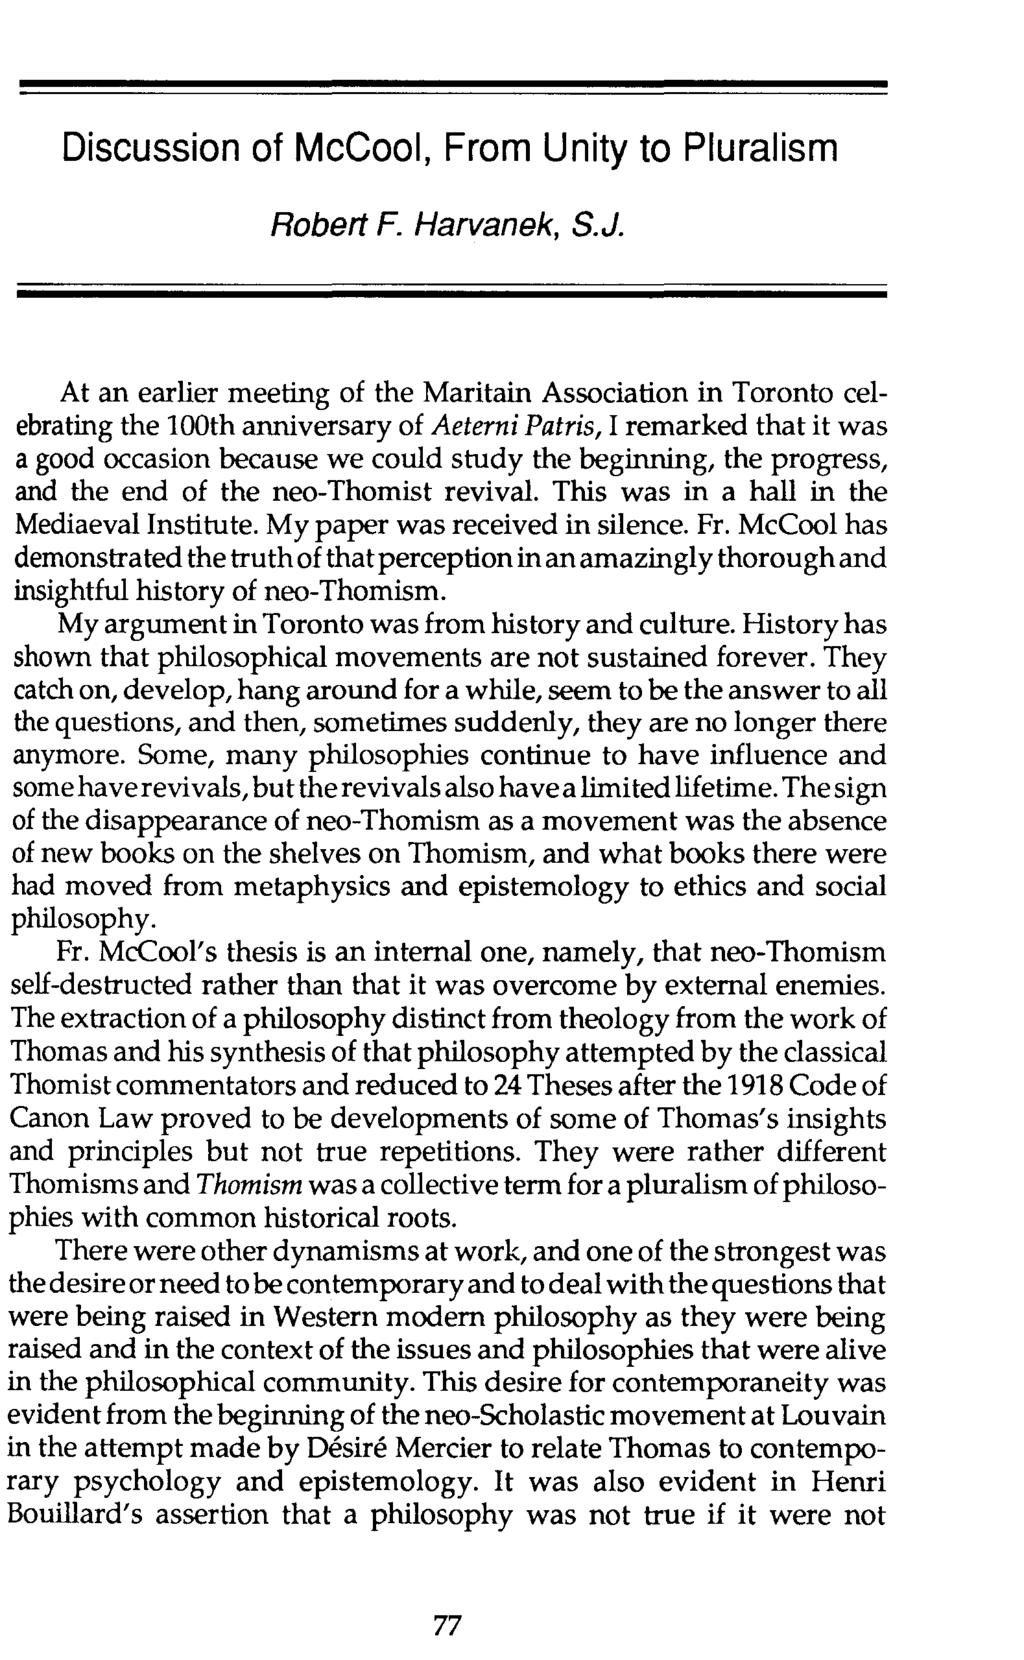 Discussion of McCool, From Unity to Pluralism Robert F. Harvanek, S.J.